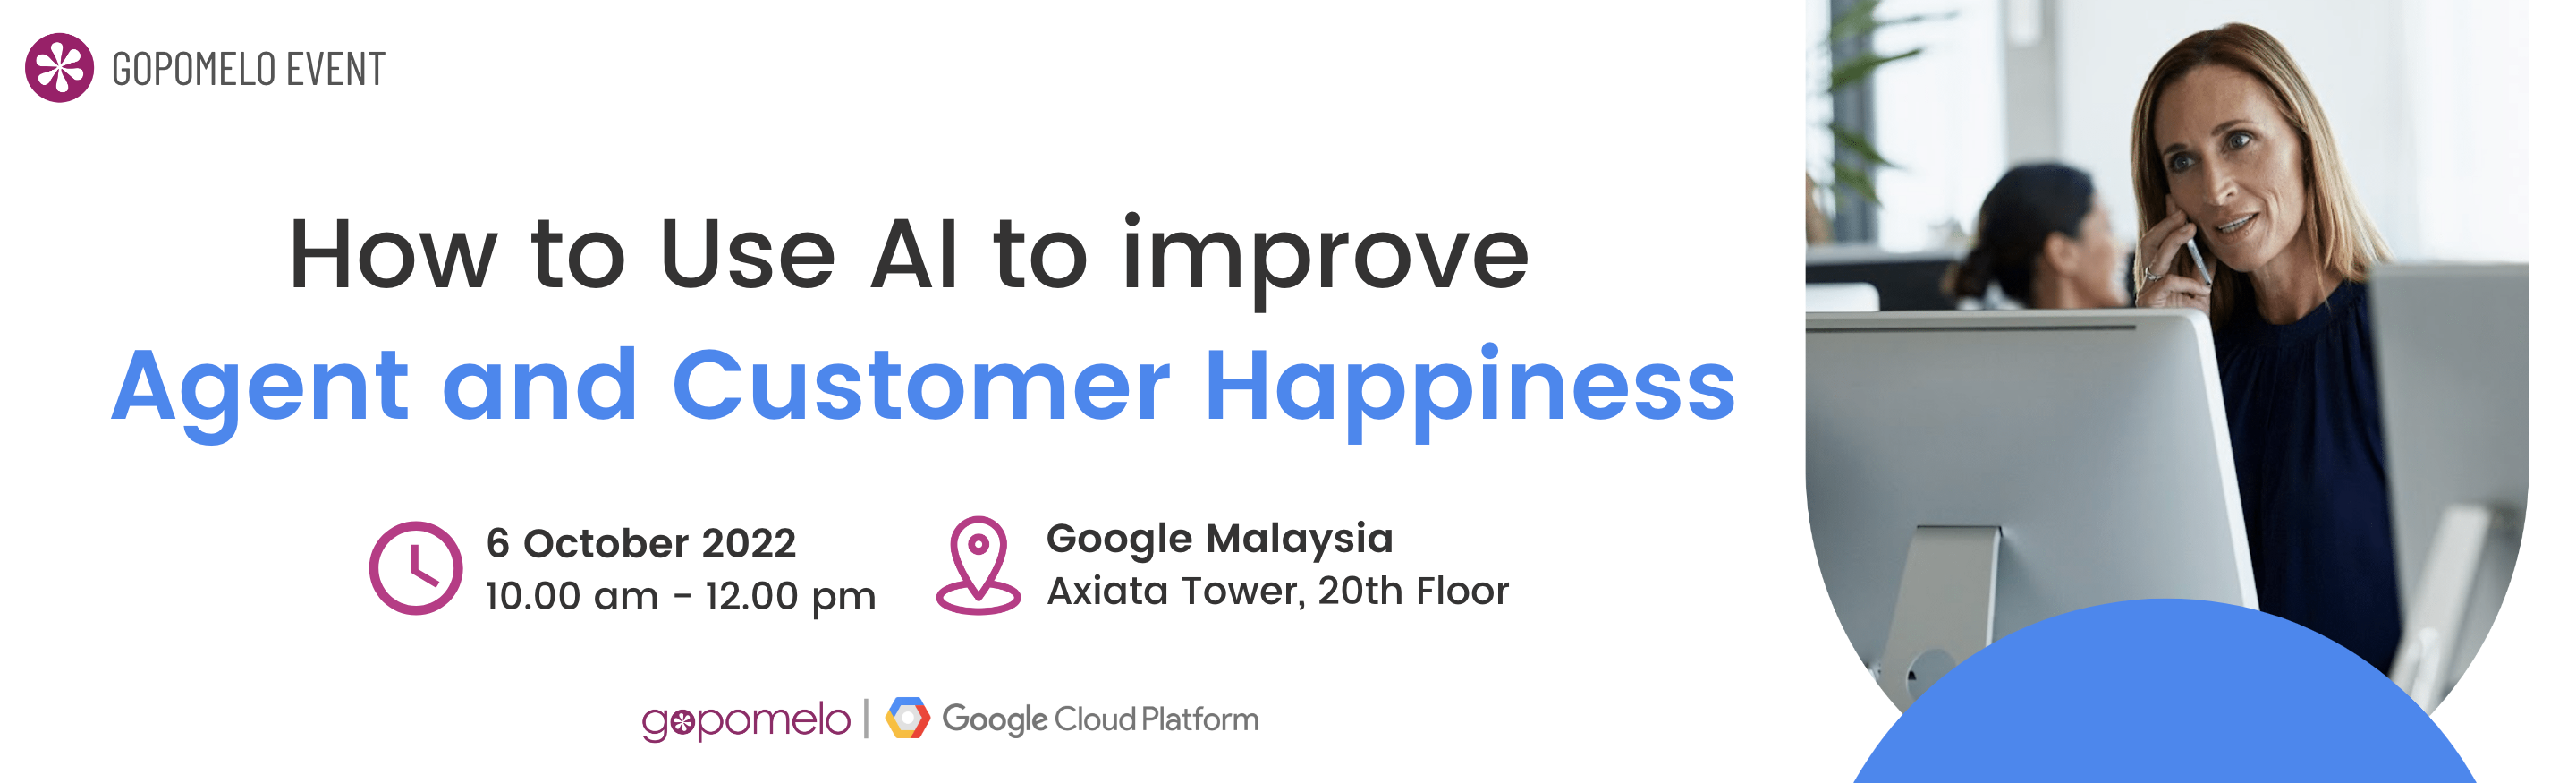 How to Use AI to Improve Agent and Customer Happiness